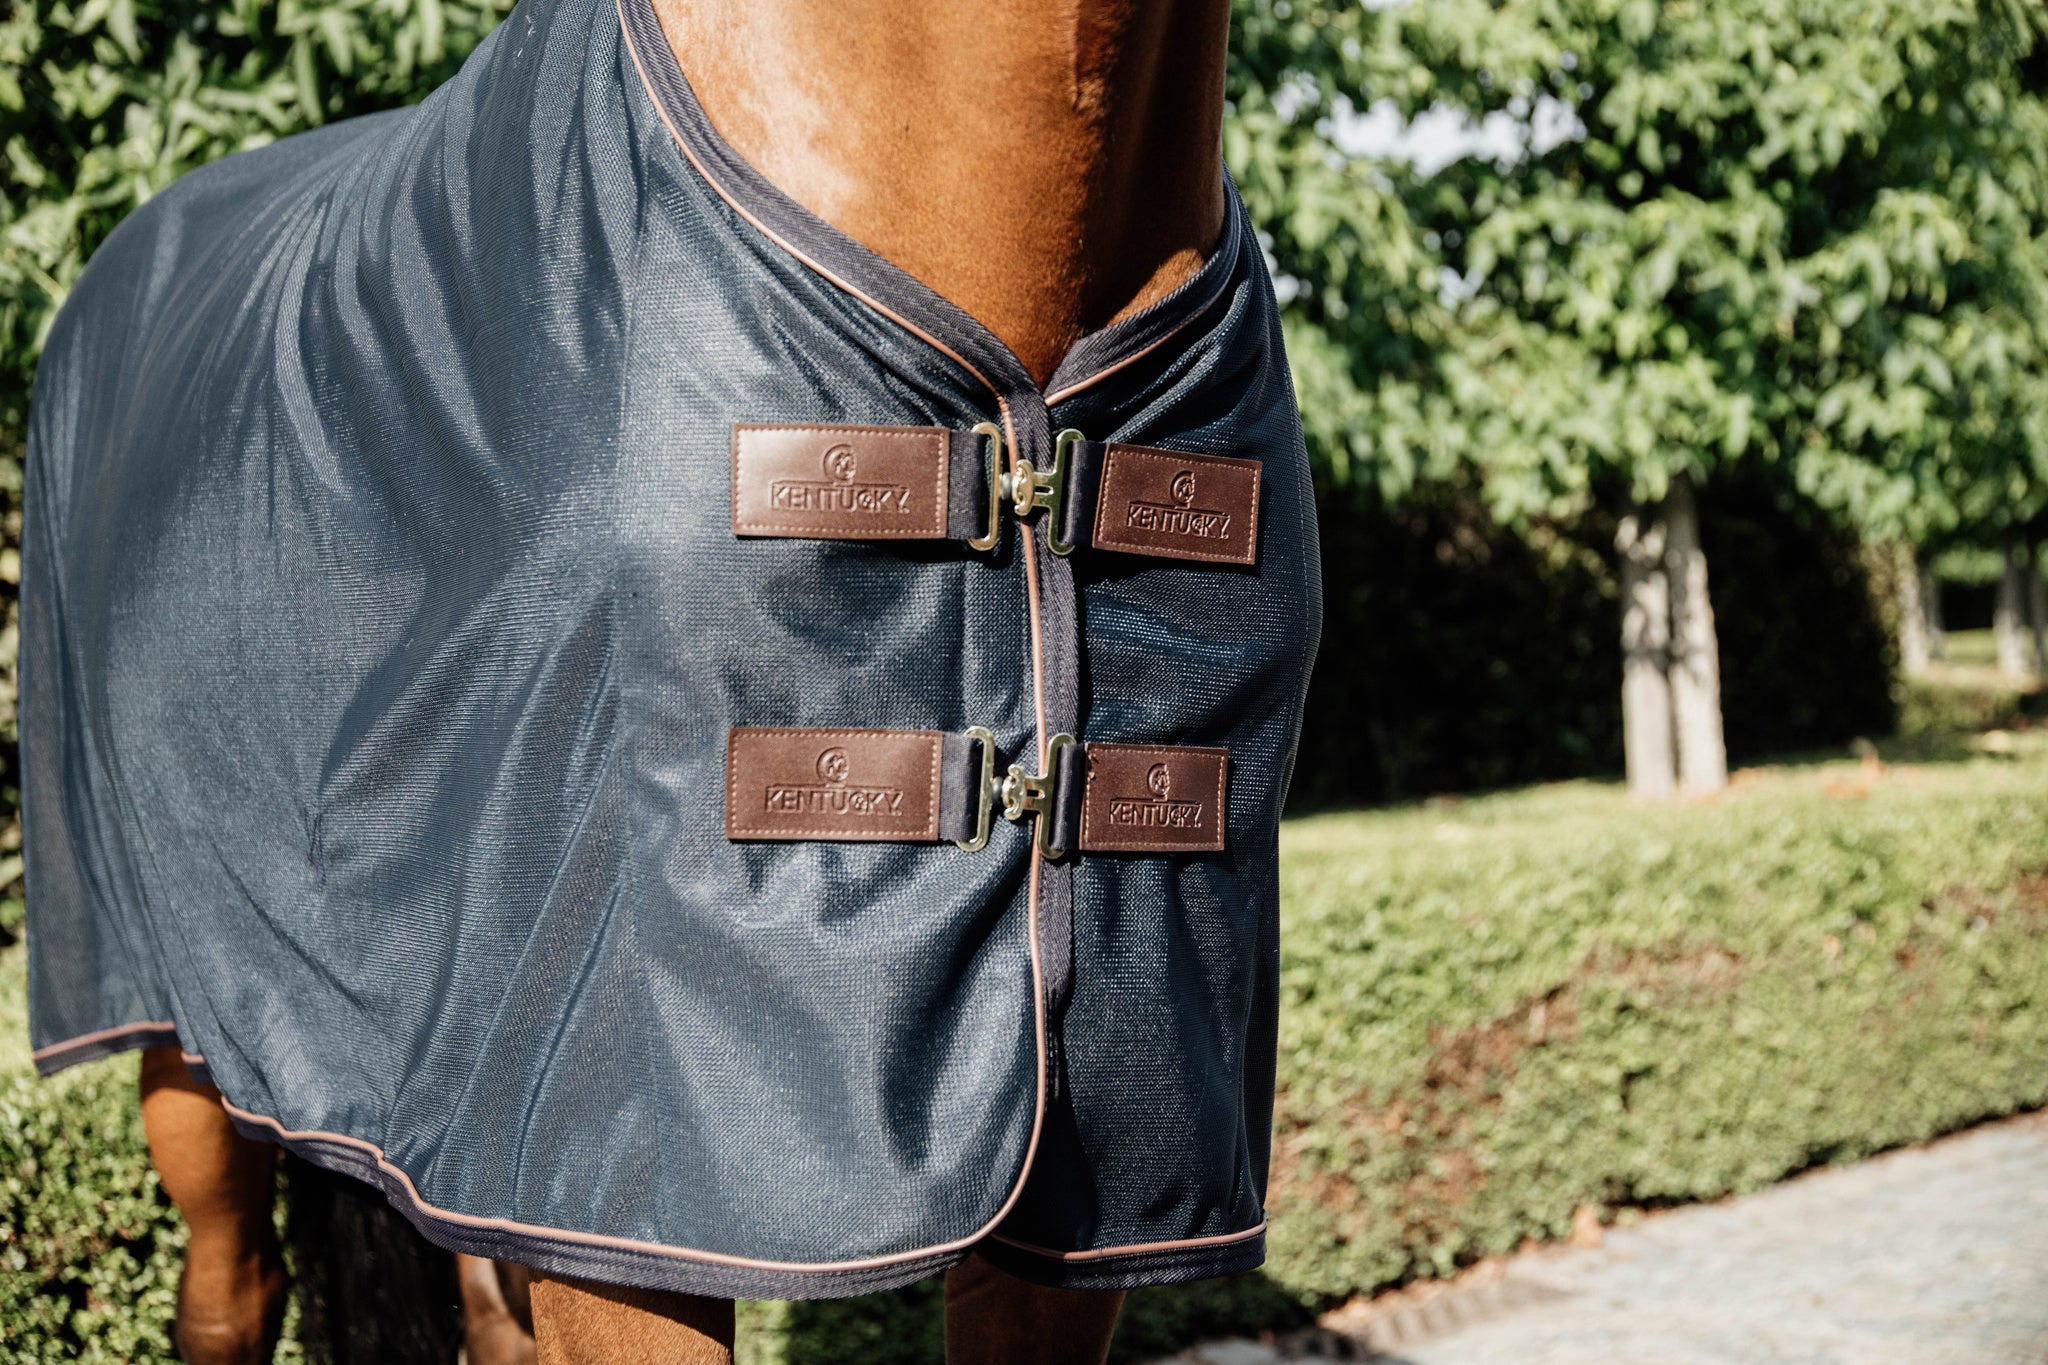 This Fly sheet will be your horse’s best friend during summer. Some horses have sensitive skin and need some extra protection in the stables against flies. Kentucky have developed a light rug to prevent your horse from any bugs at the stable.